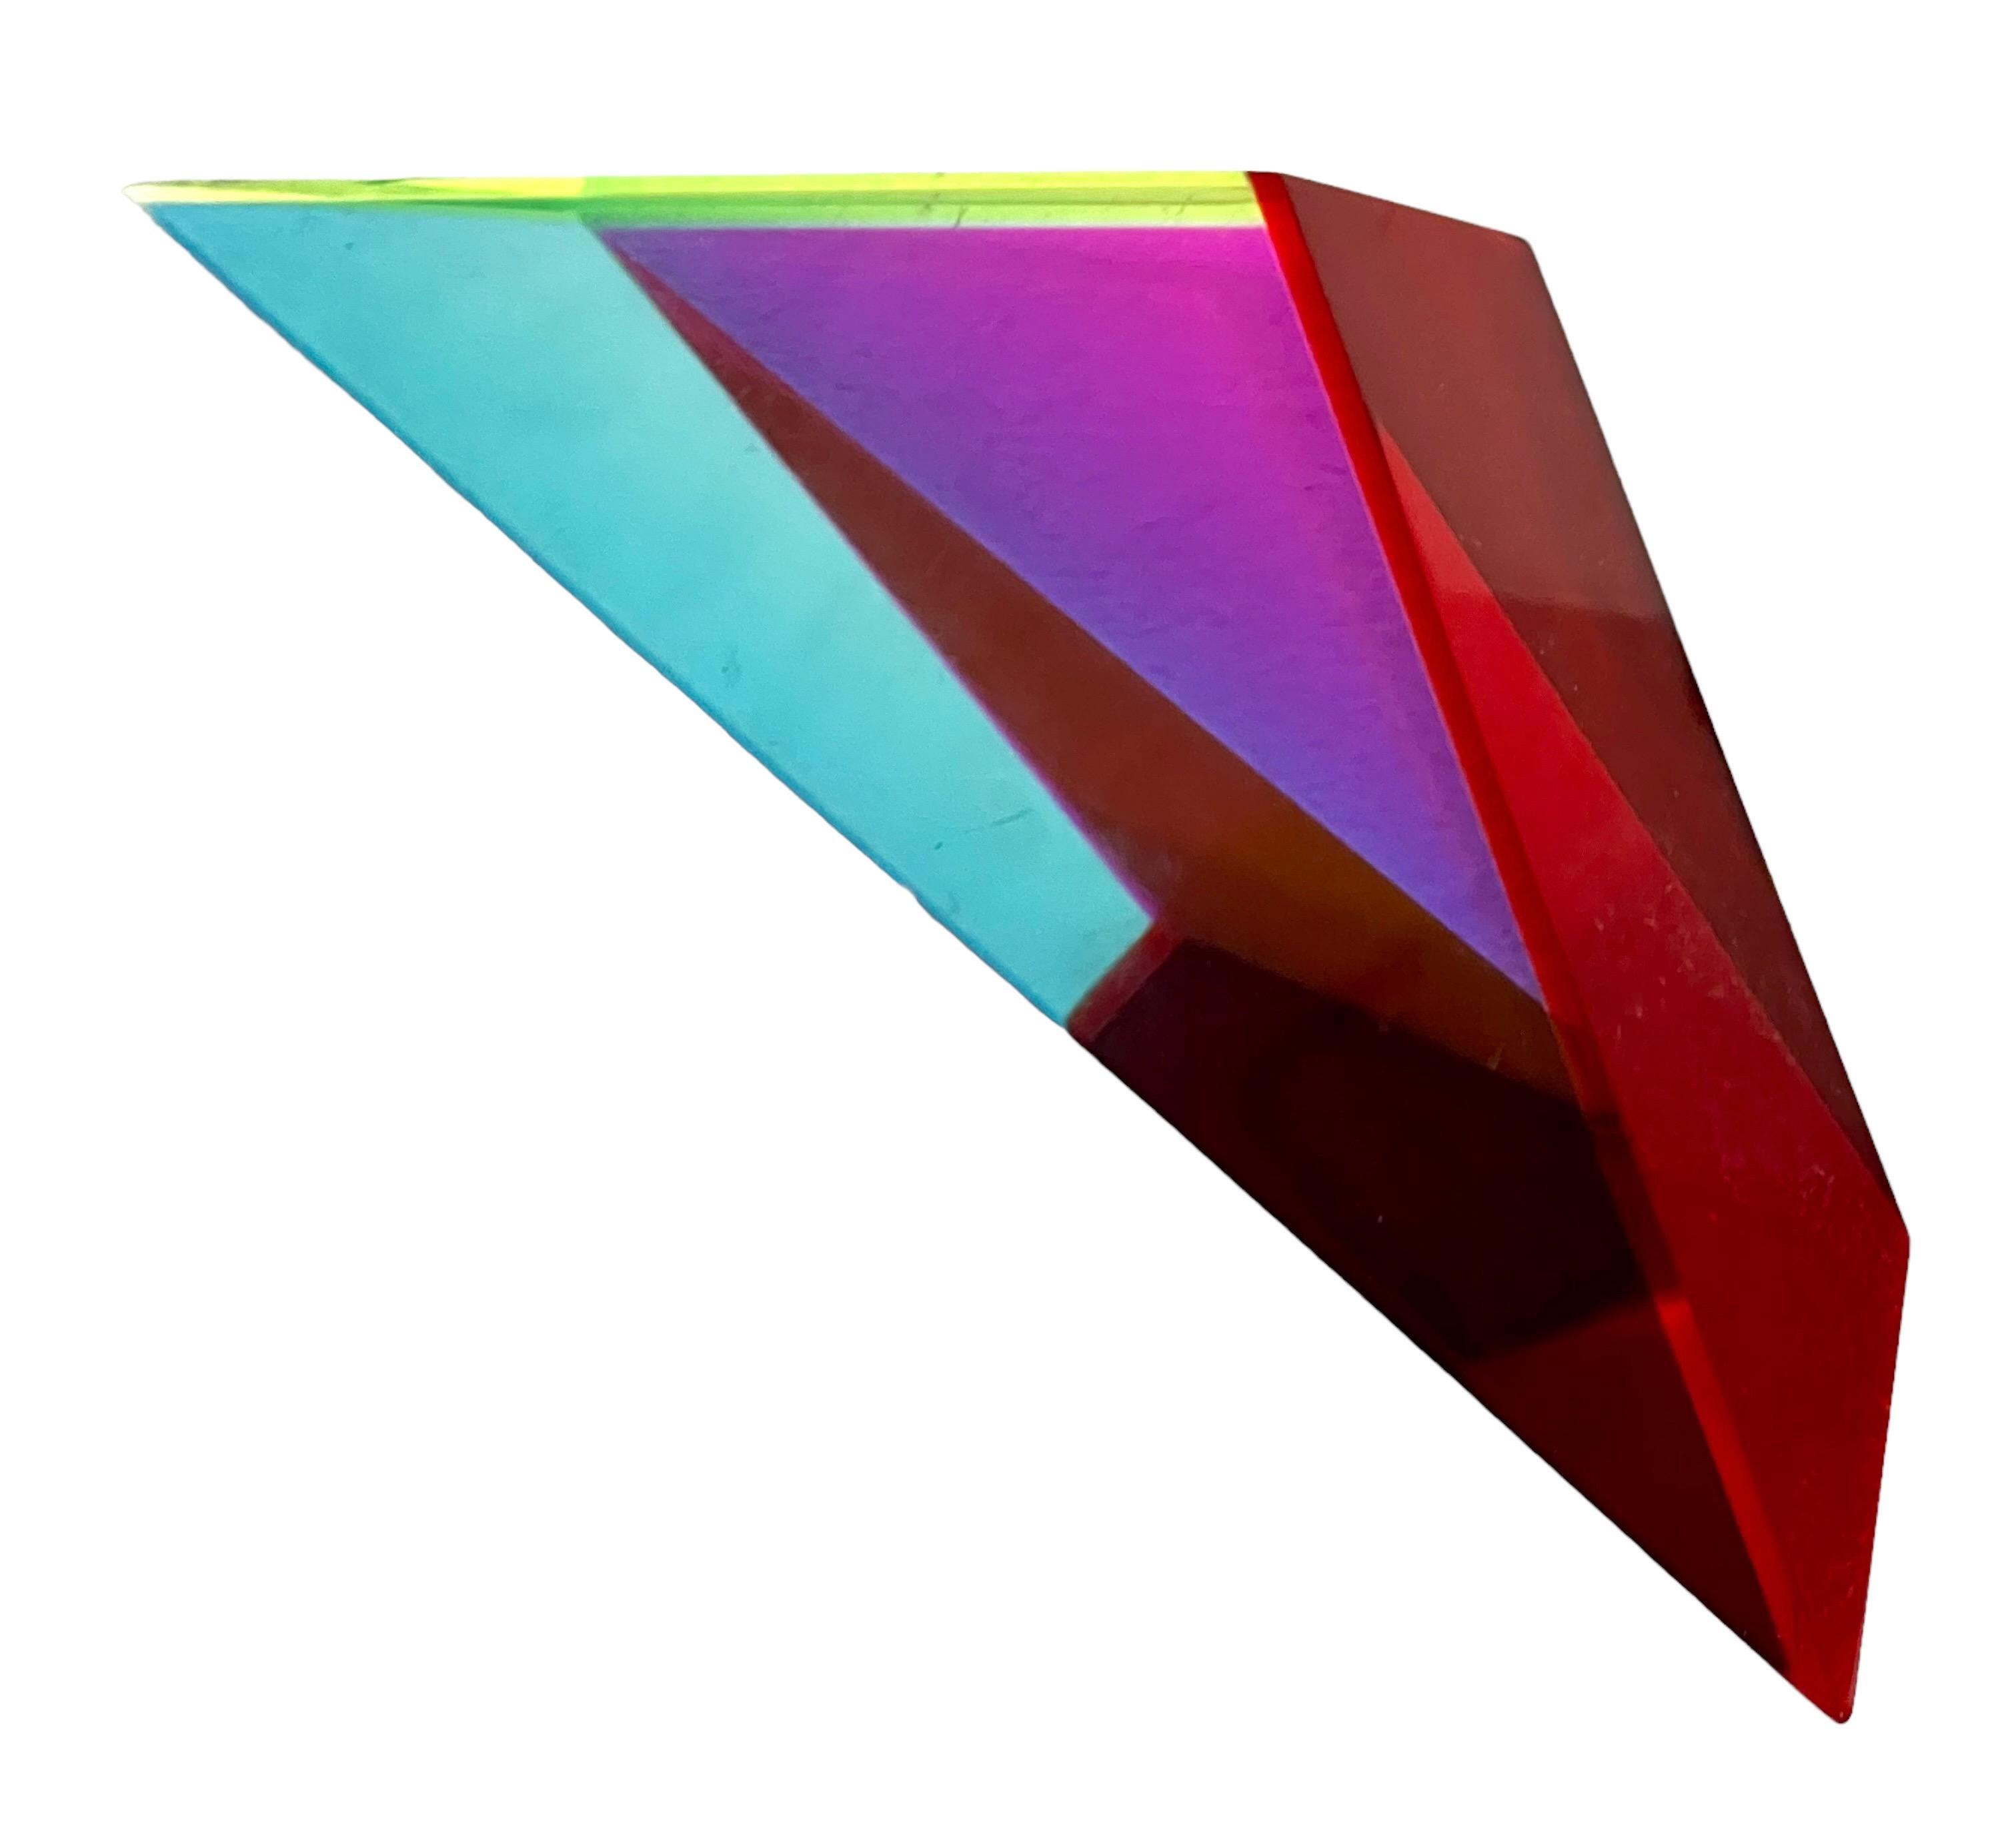 Hand Signed Dated 1993 Colorful Acrylic Vasa Laminated Lucite Triangle Sculpture For Sale 10